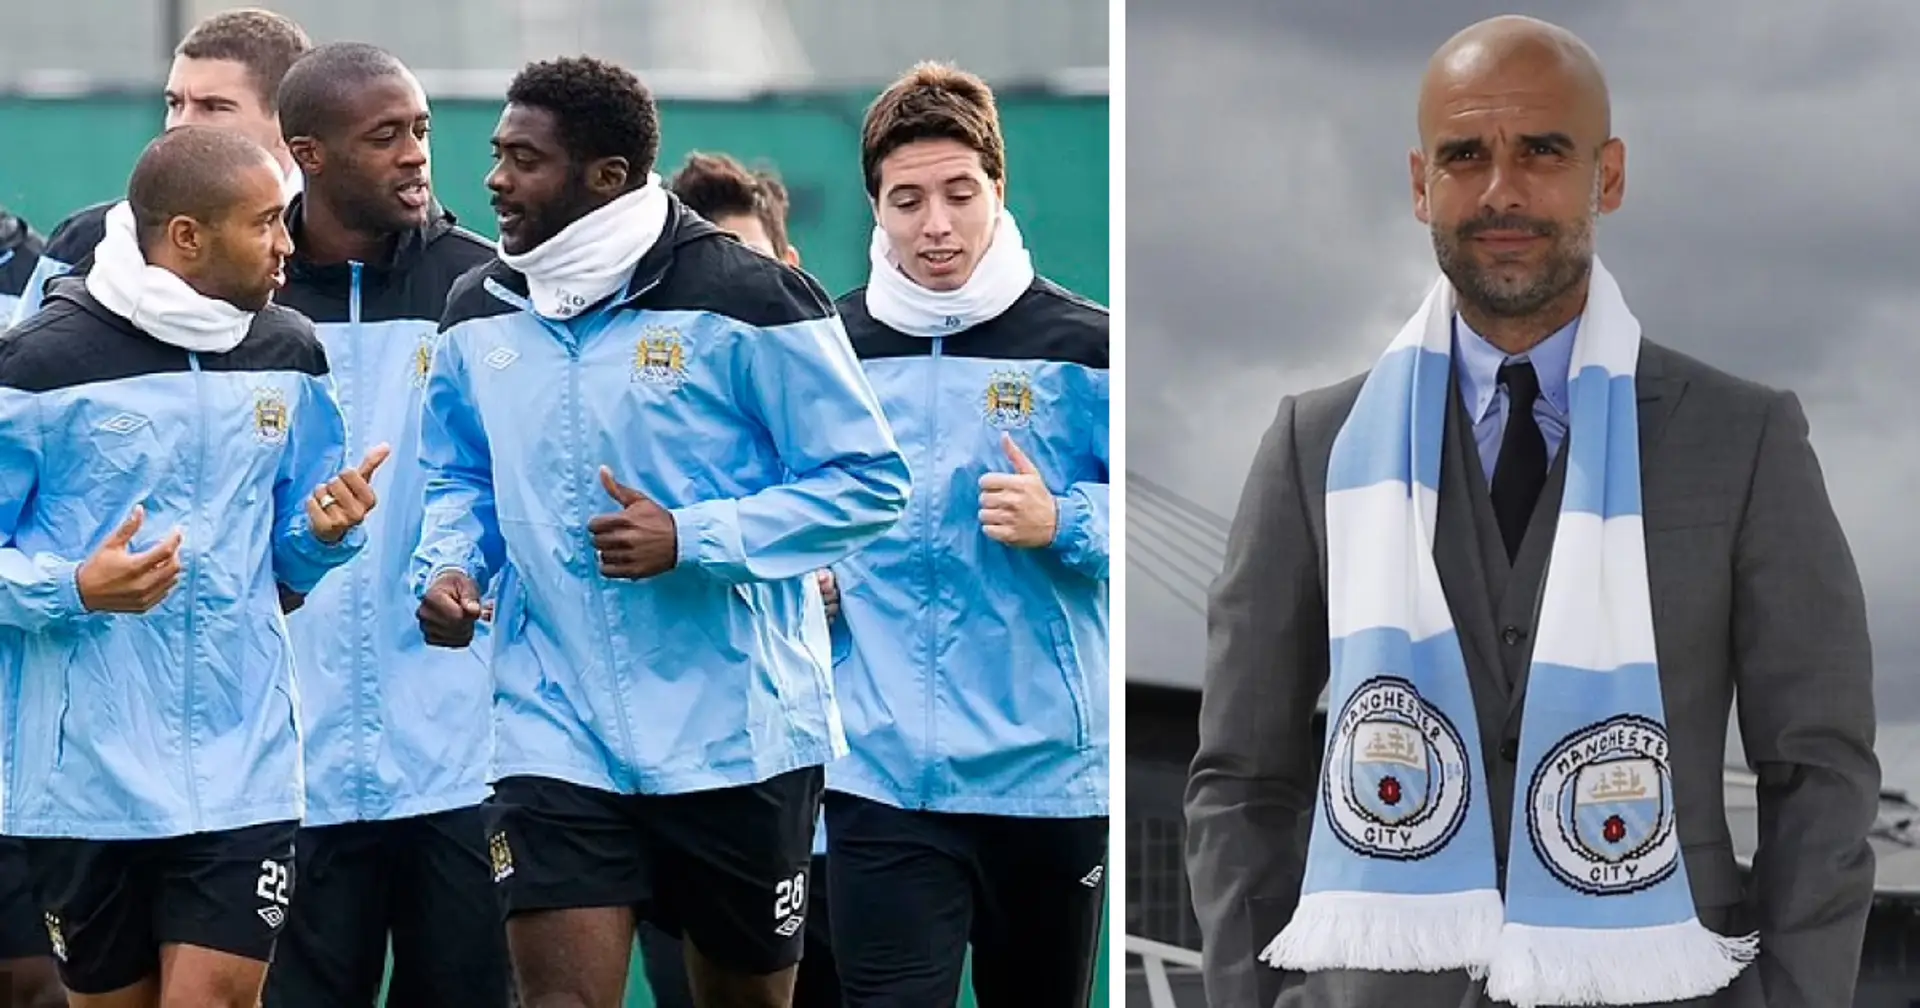 'You're a team full of fat players': Man City player recalls Guardiola's first words when he took charge in 2016